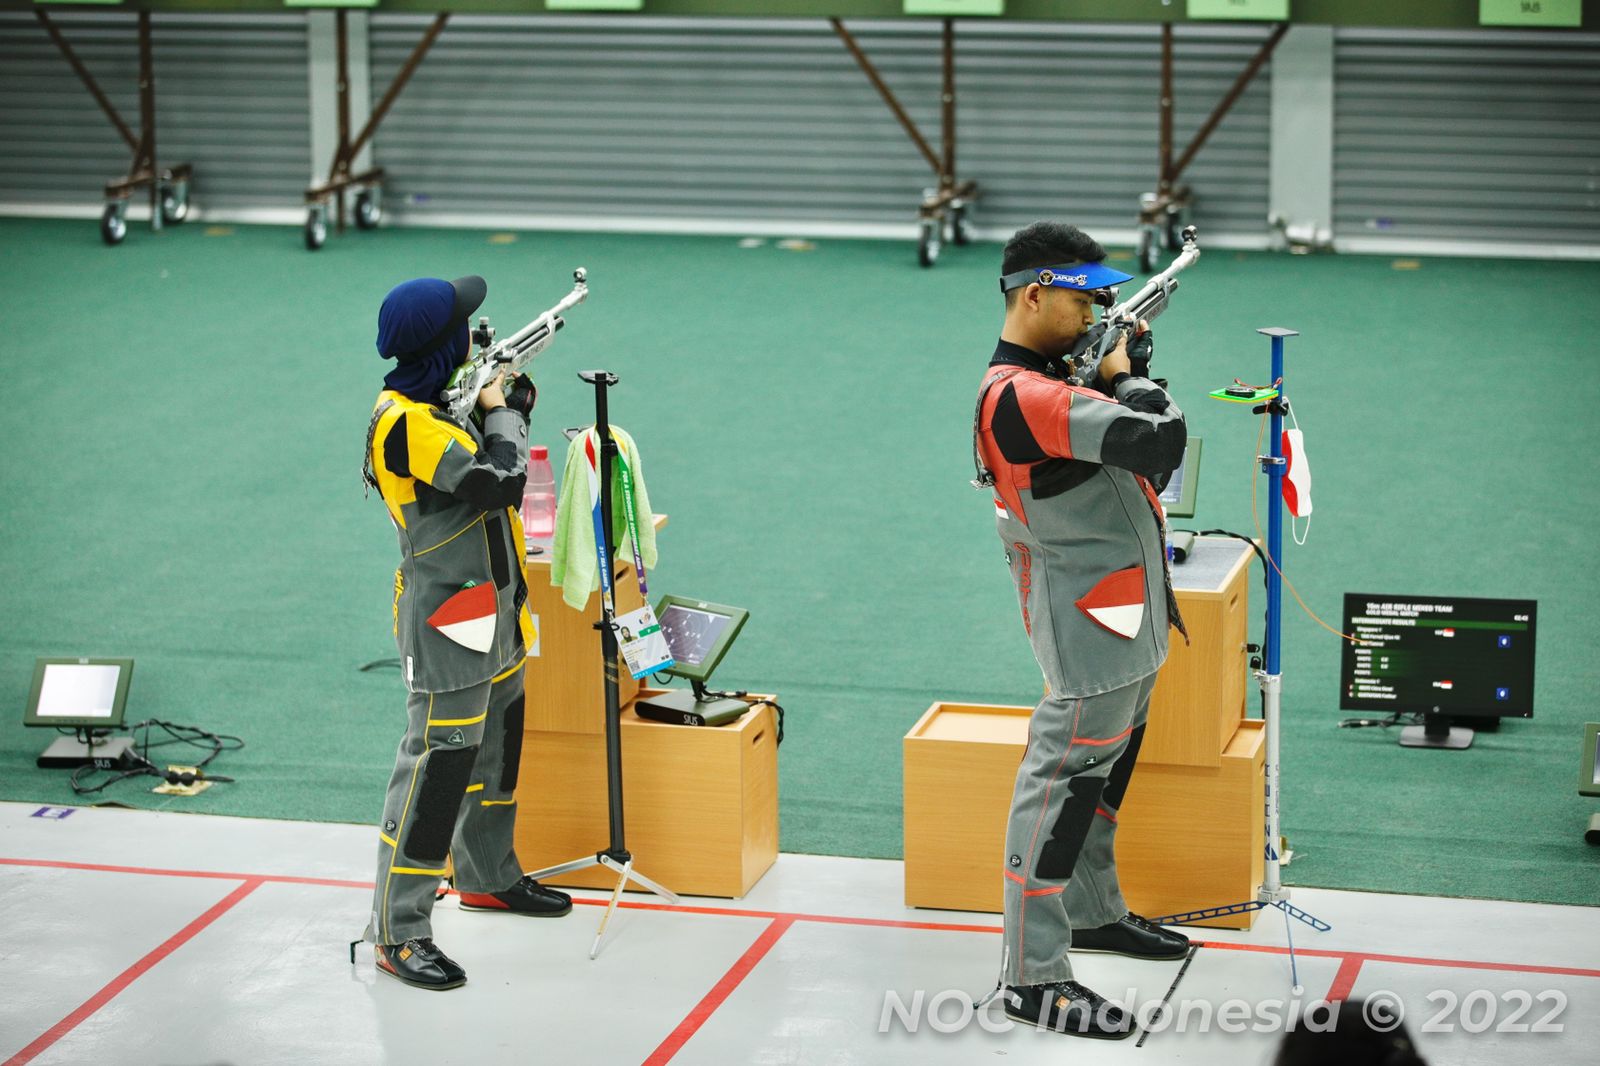 Indonesia Olympic Commitee - Fathur/Citra on target, Indonesia wins another gold medal